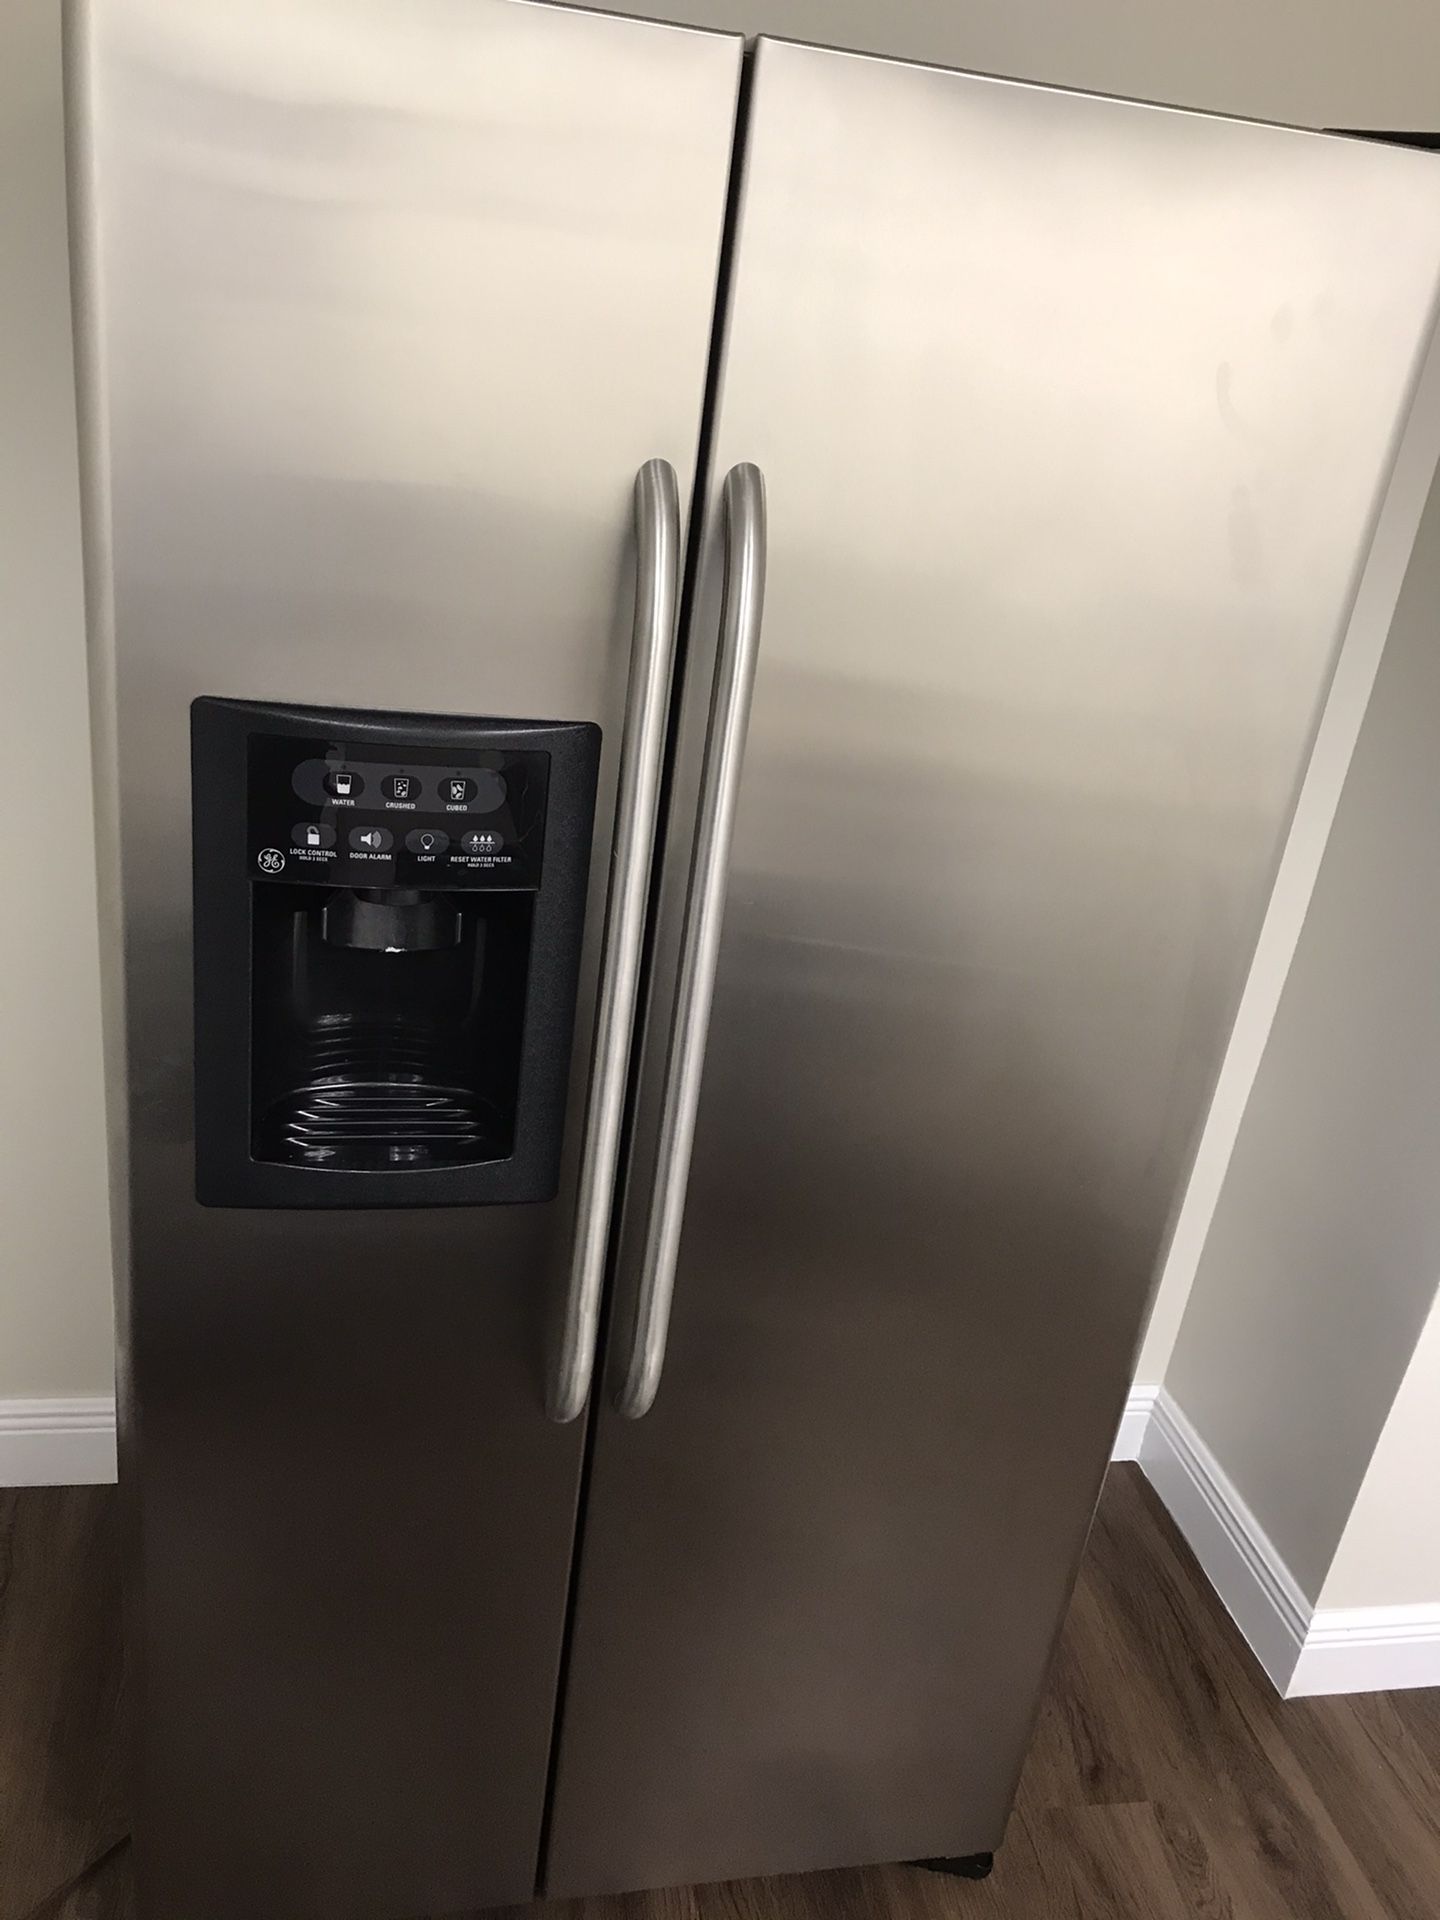 Used Stainless Steel GE side by side Refrigerator - Excellent shape